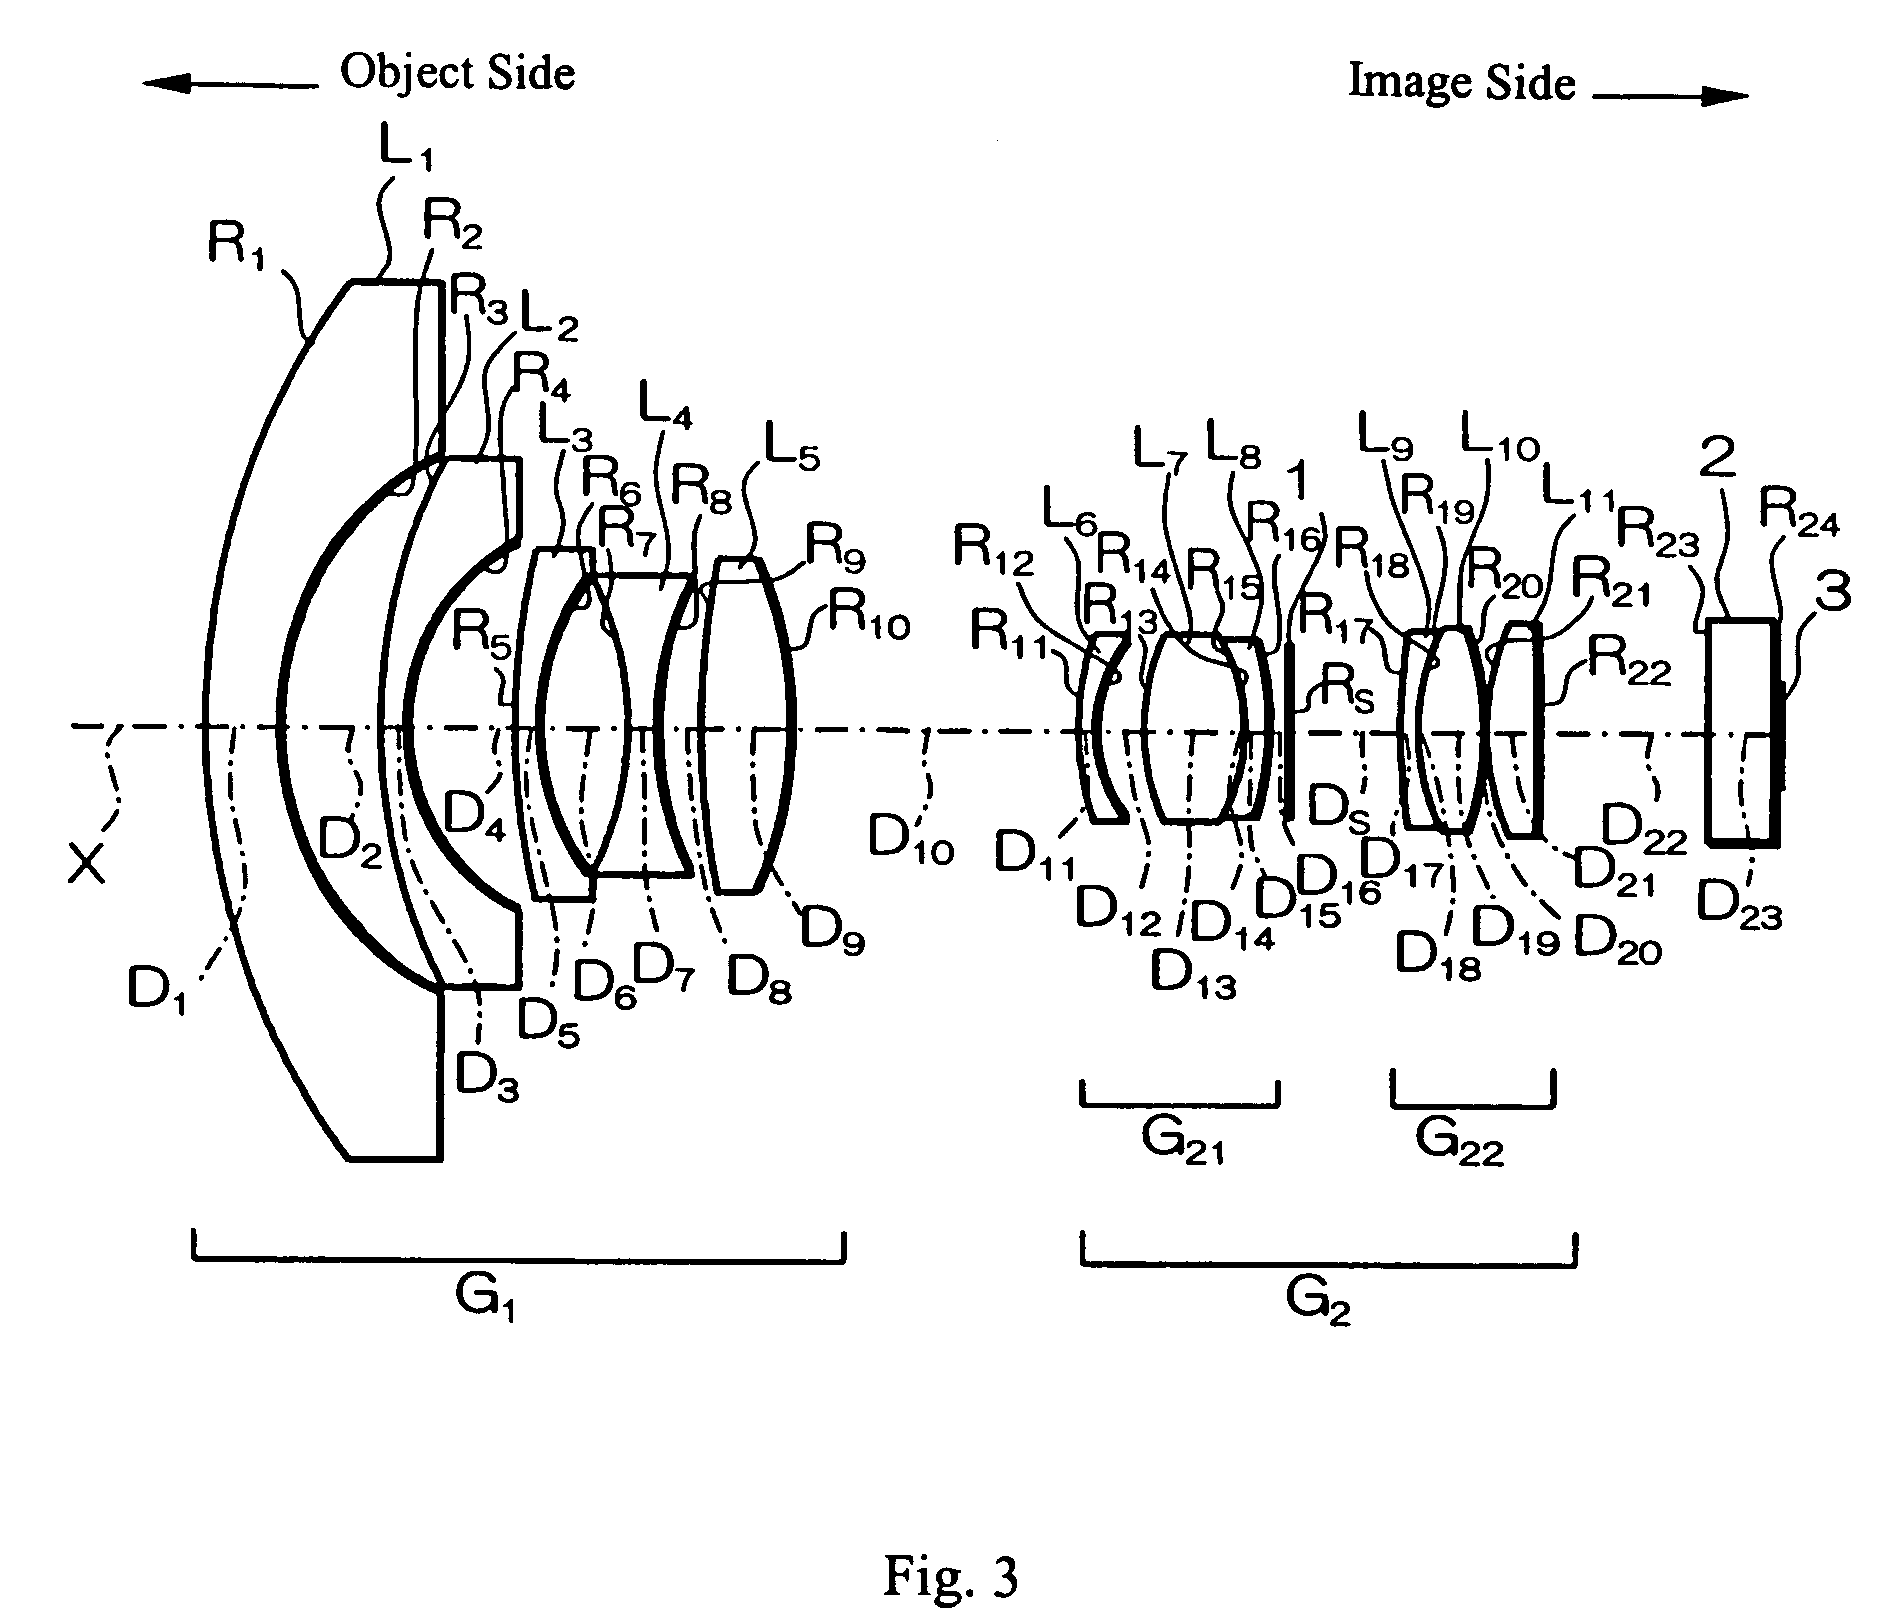 Fisheye lens and imaging device using it